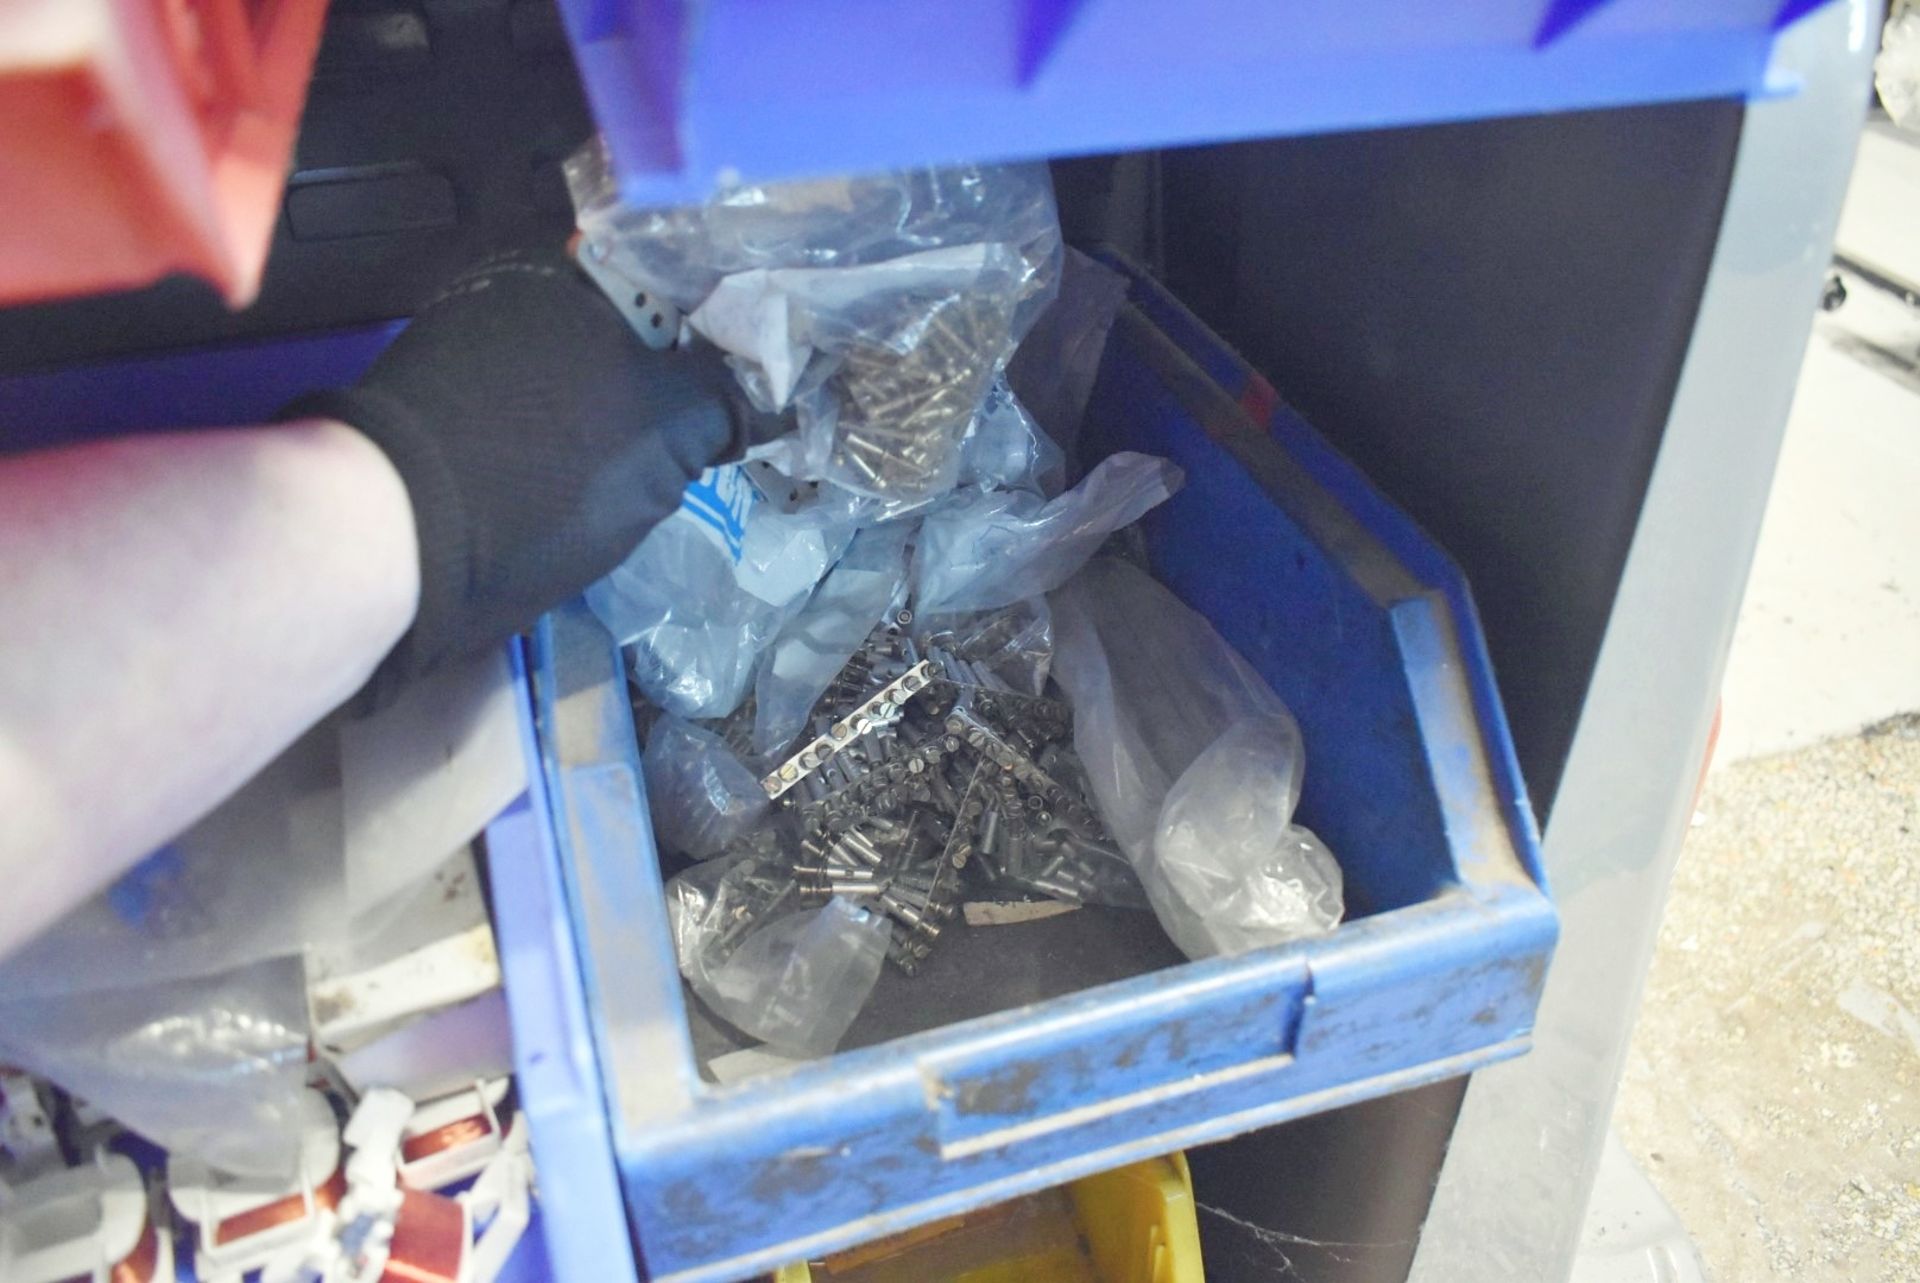 40 x Linbins With Contents - Screws, Nuts, Washes, Fixing Brackets, Strip Connects, Fuses and More - Image 18 of 24